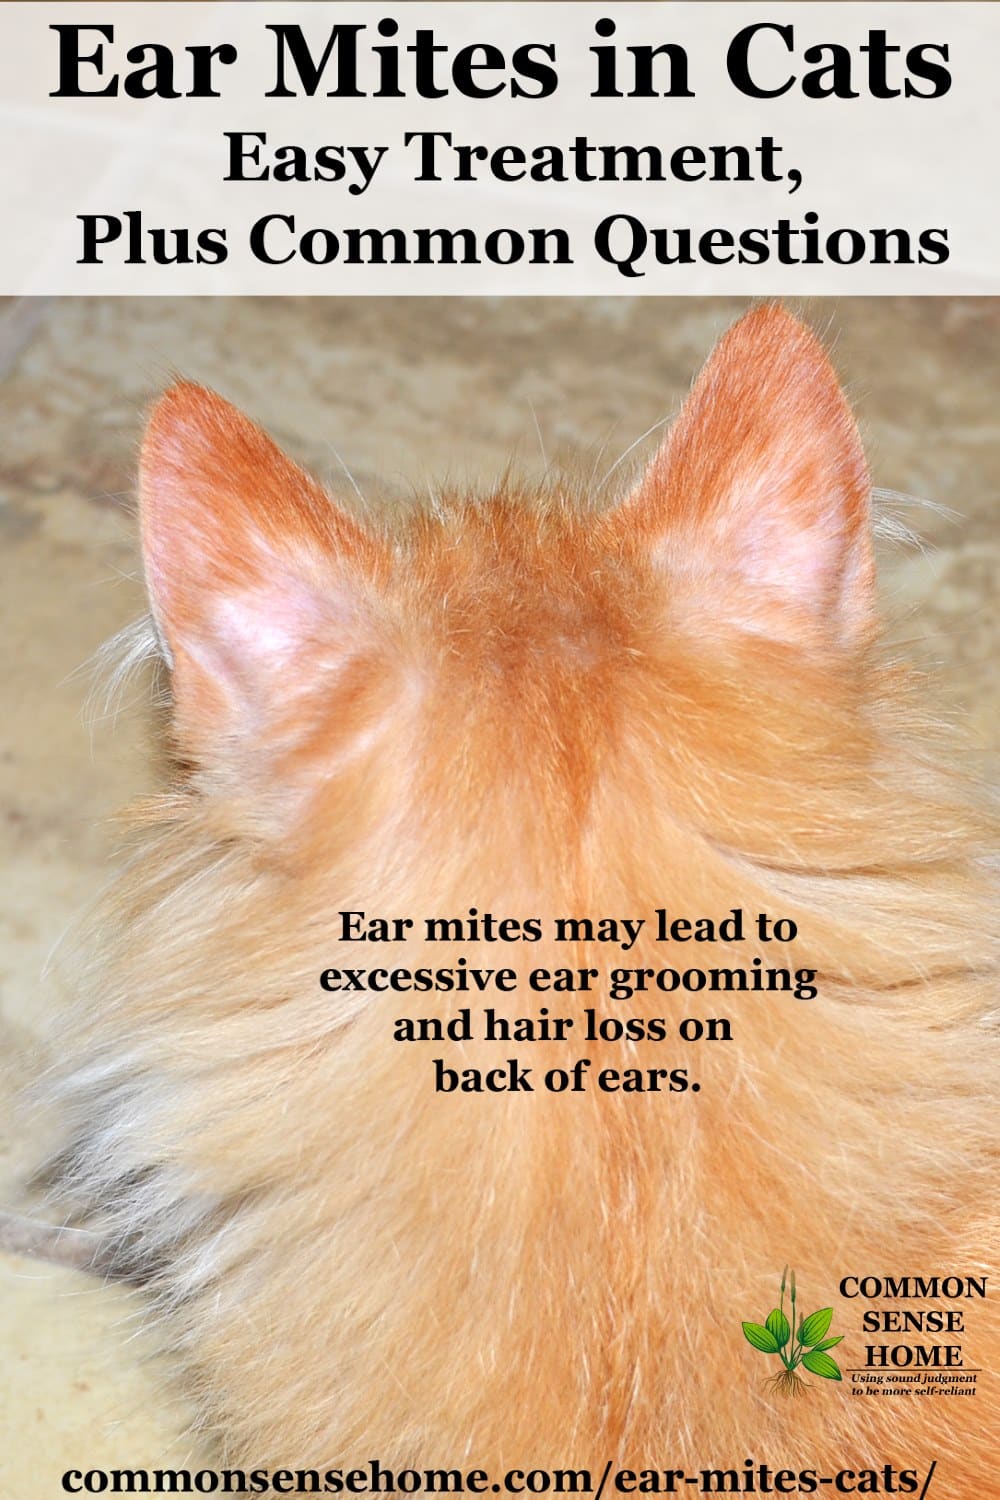 Ear Mites in Cats - Easy Treatment, Plus Common Questions